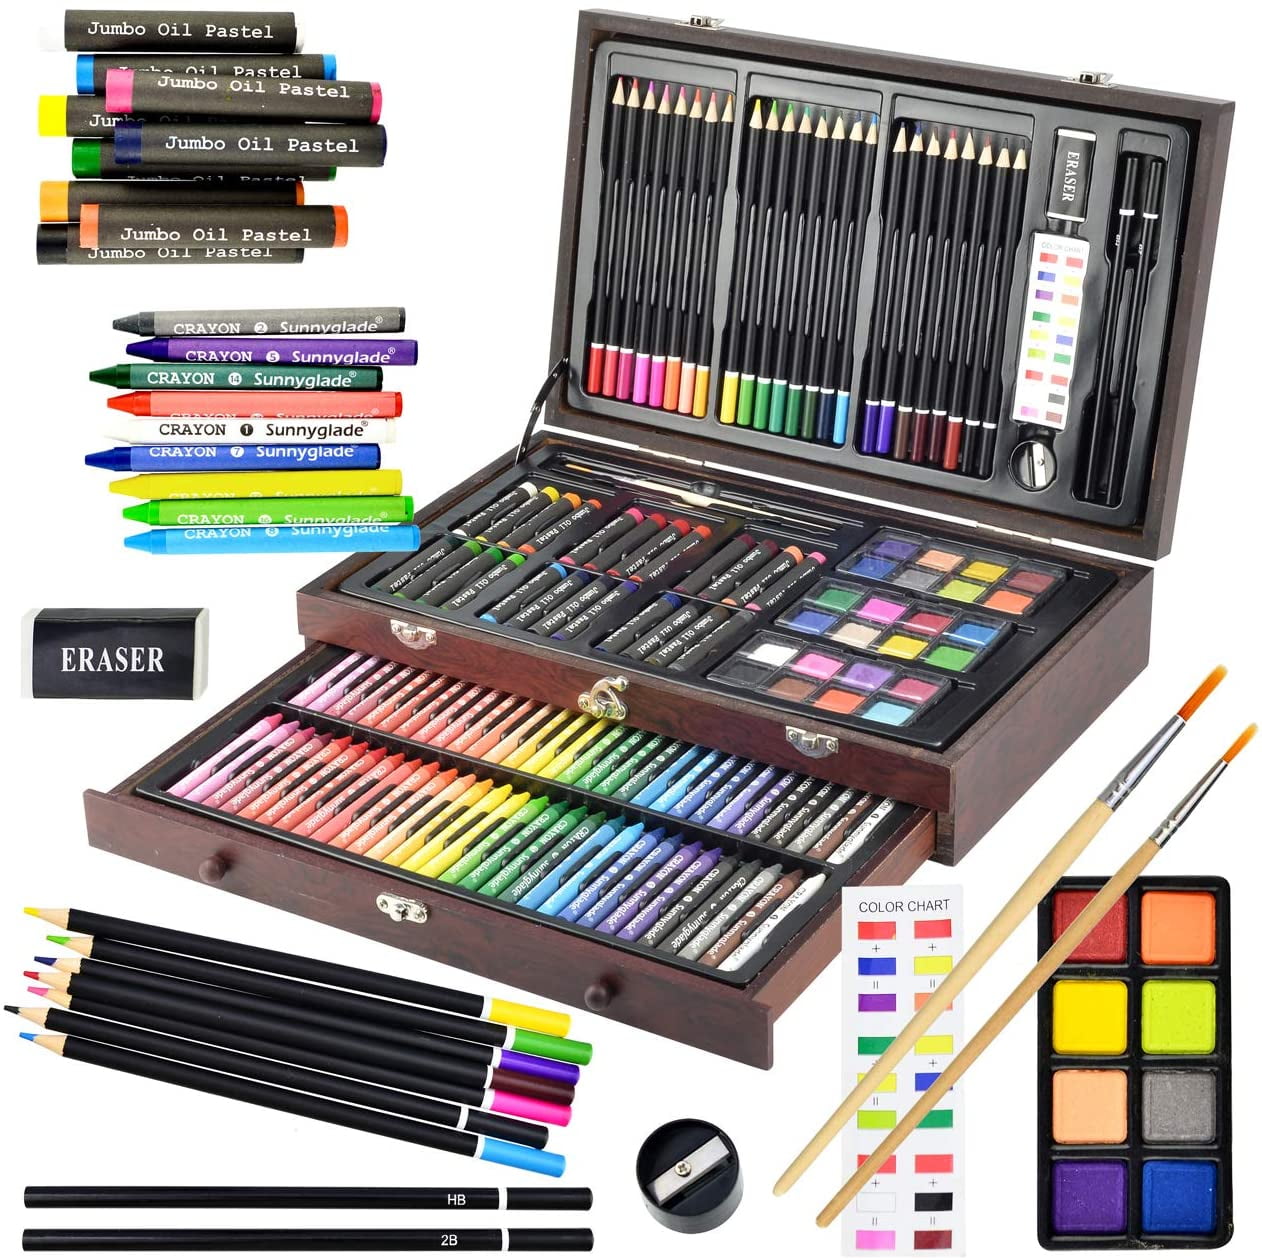 HB 51pcsset Professional Drawing Kit Wood Pencil Sketching Pencils Art  Sketch Painting Supplies with Carrying Bag  Walmartcom